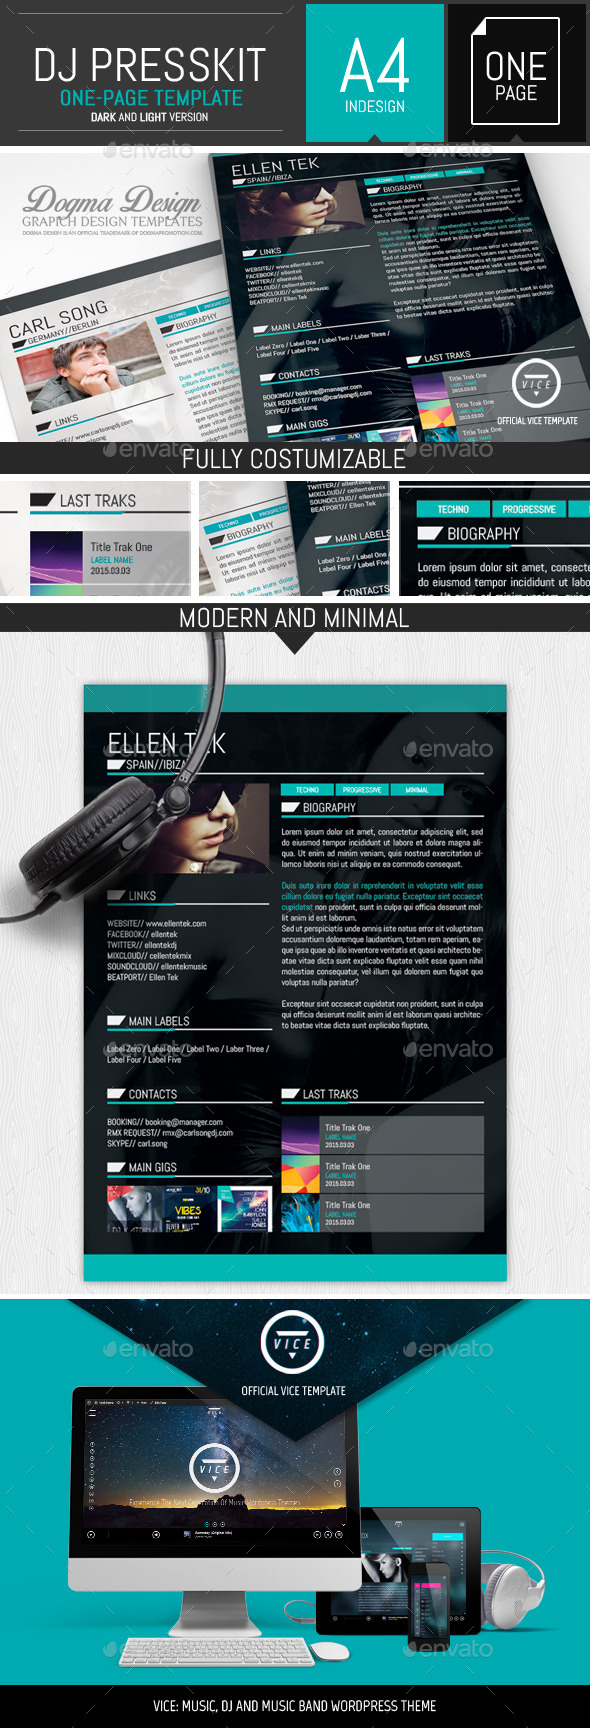 Vice: Dj / Musician OnePage Resume Indesign Template